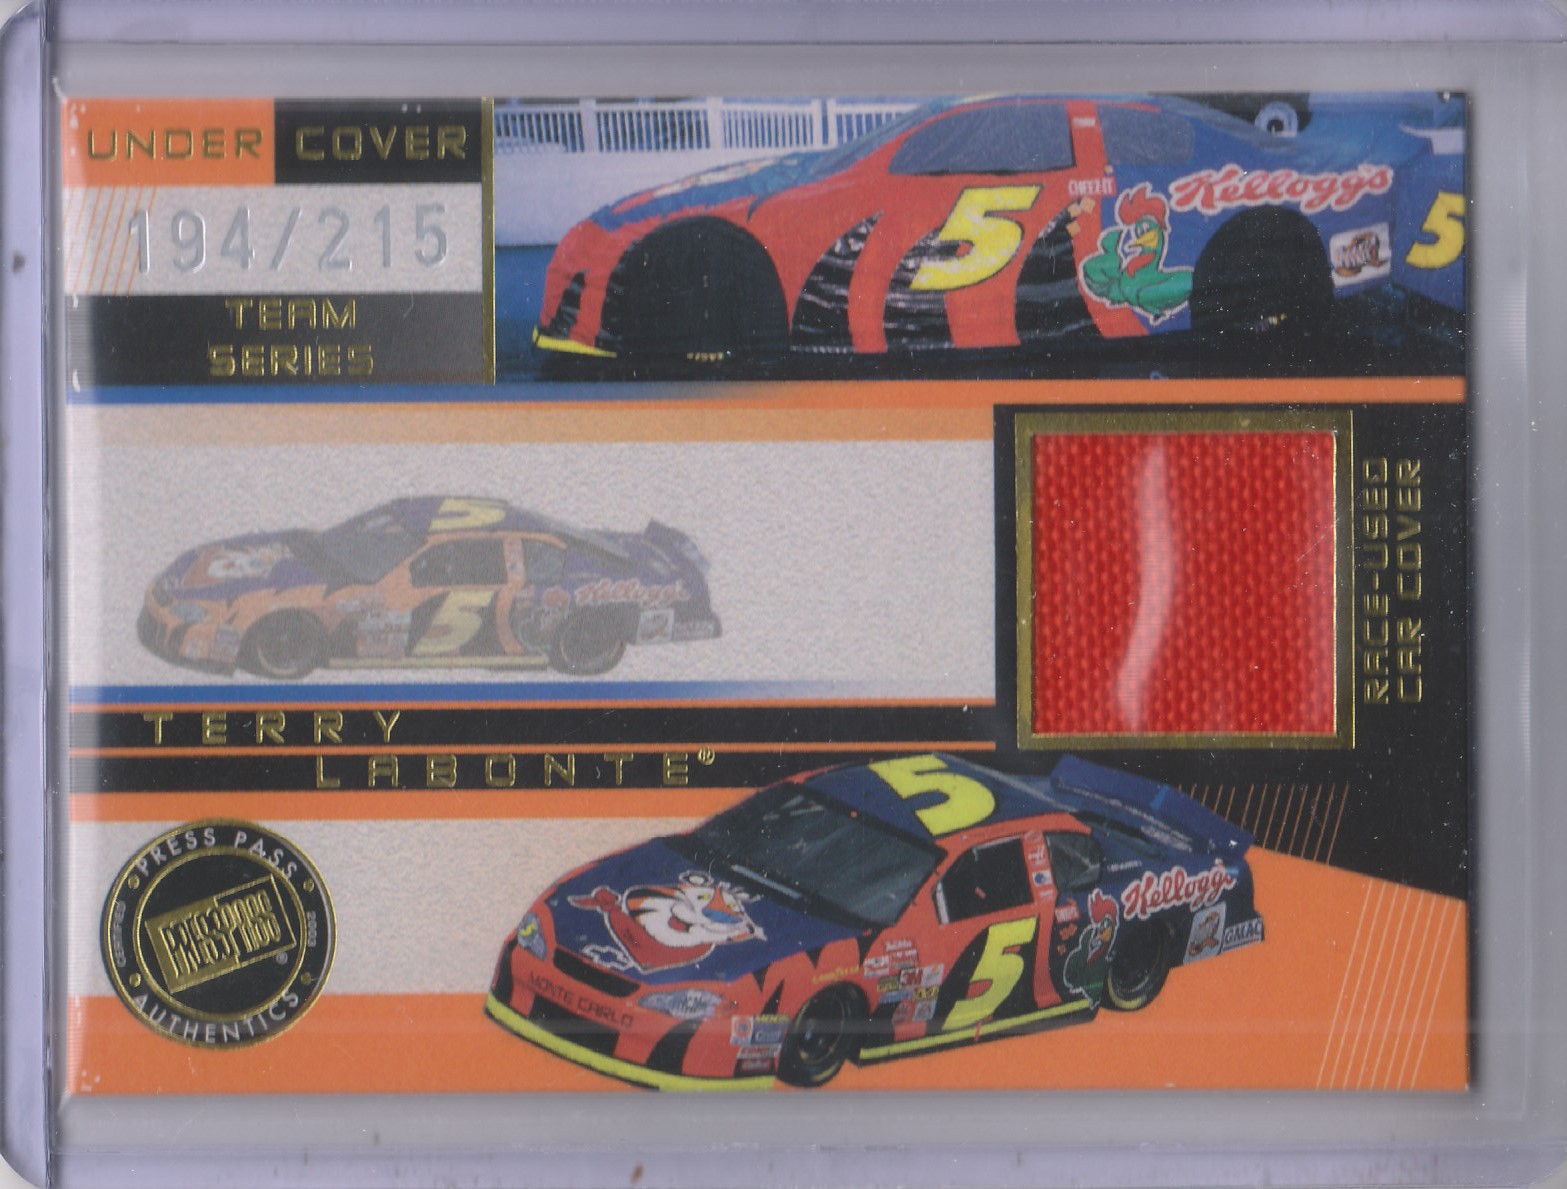 2003 Press Pass Eclipse Under Cover Cars #UCT10 Terry Labonte